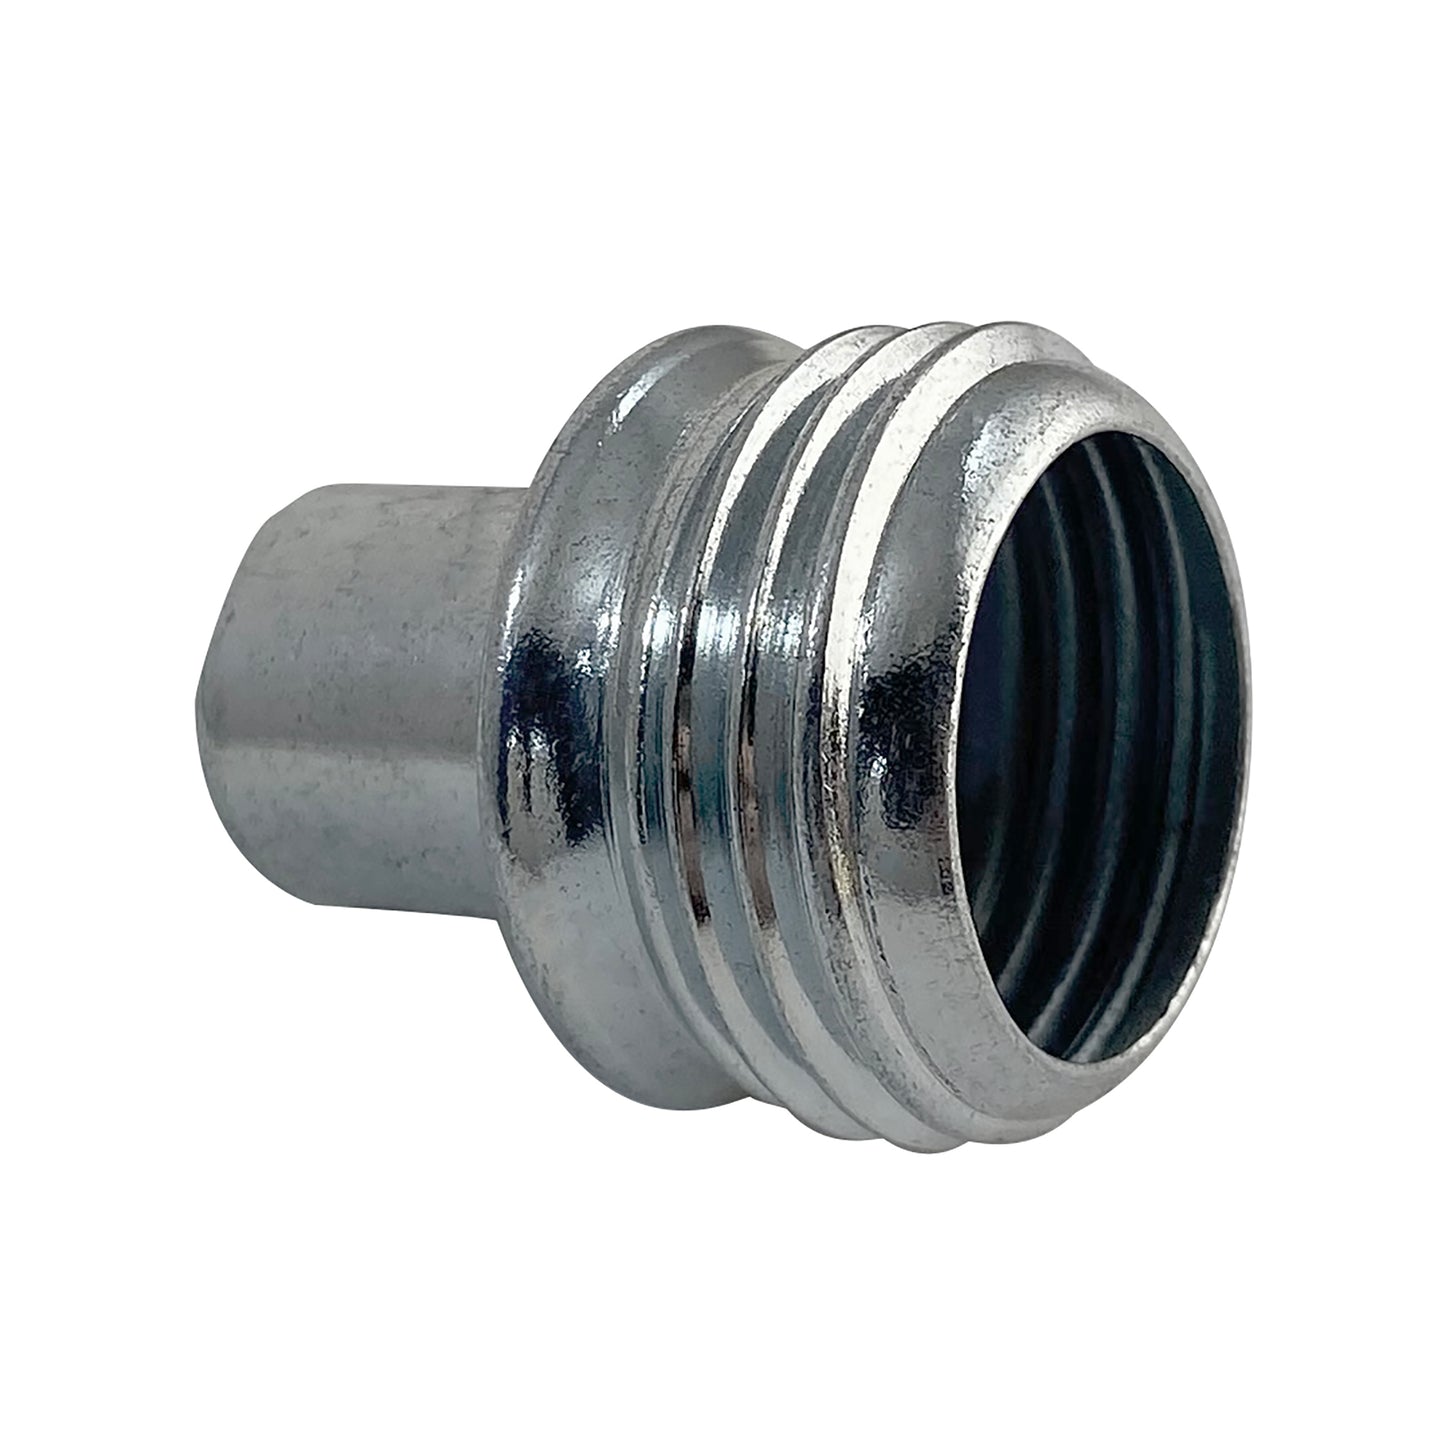 3/4" Expansion Couplings